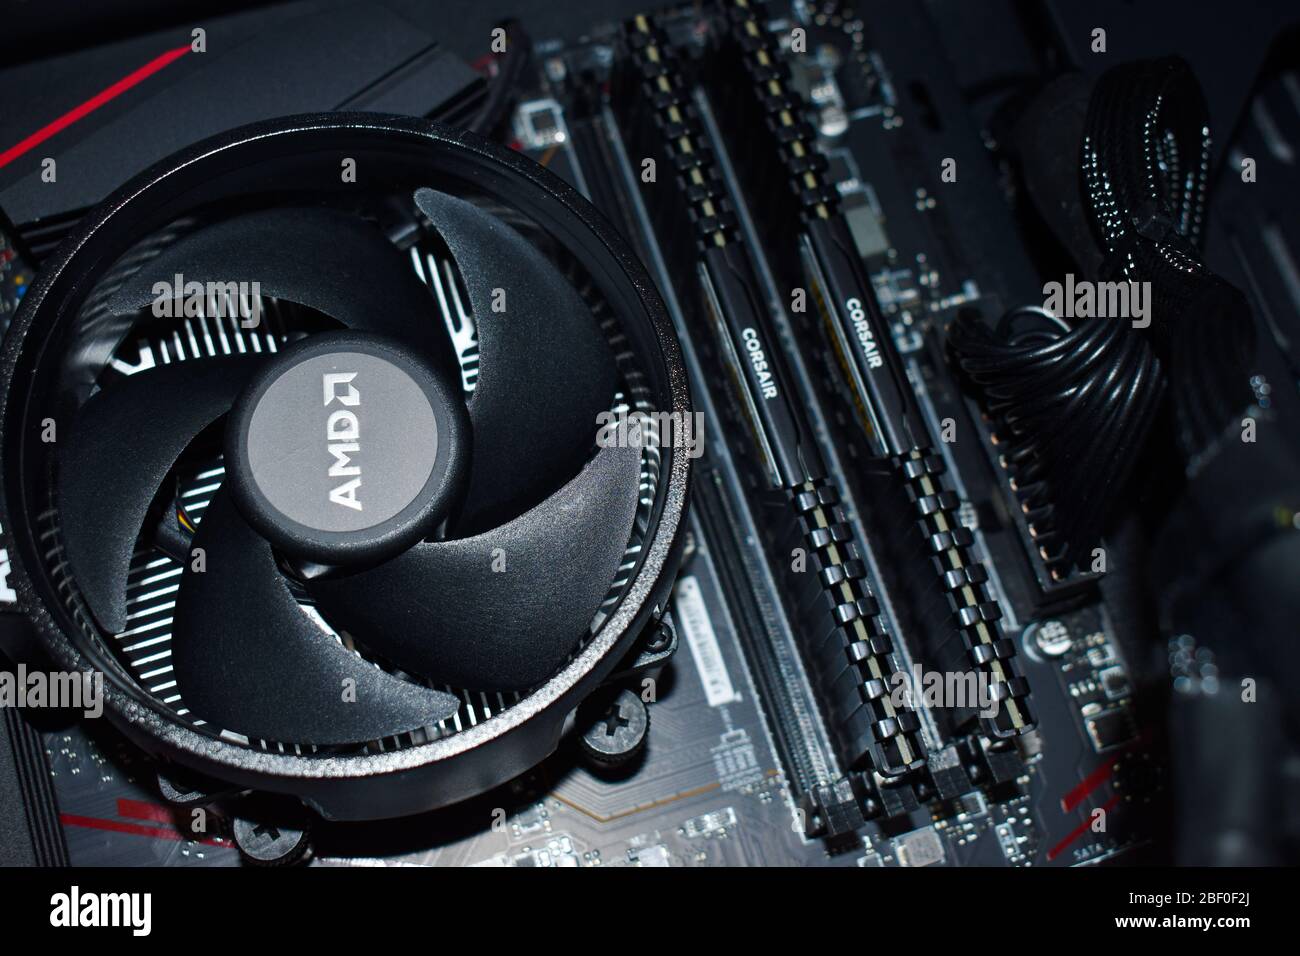 AMD Ryzen 3600 processor and Corsair RAM in a gaming PC Photo - Alamy